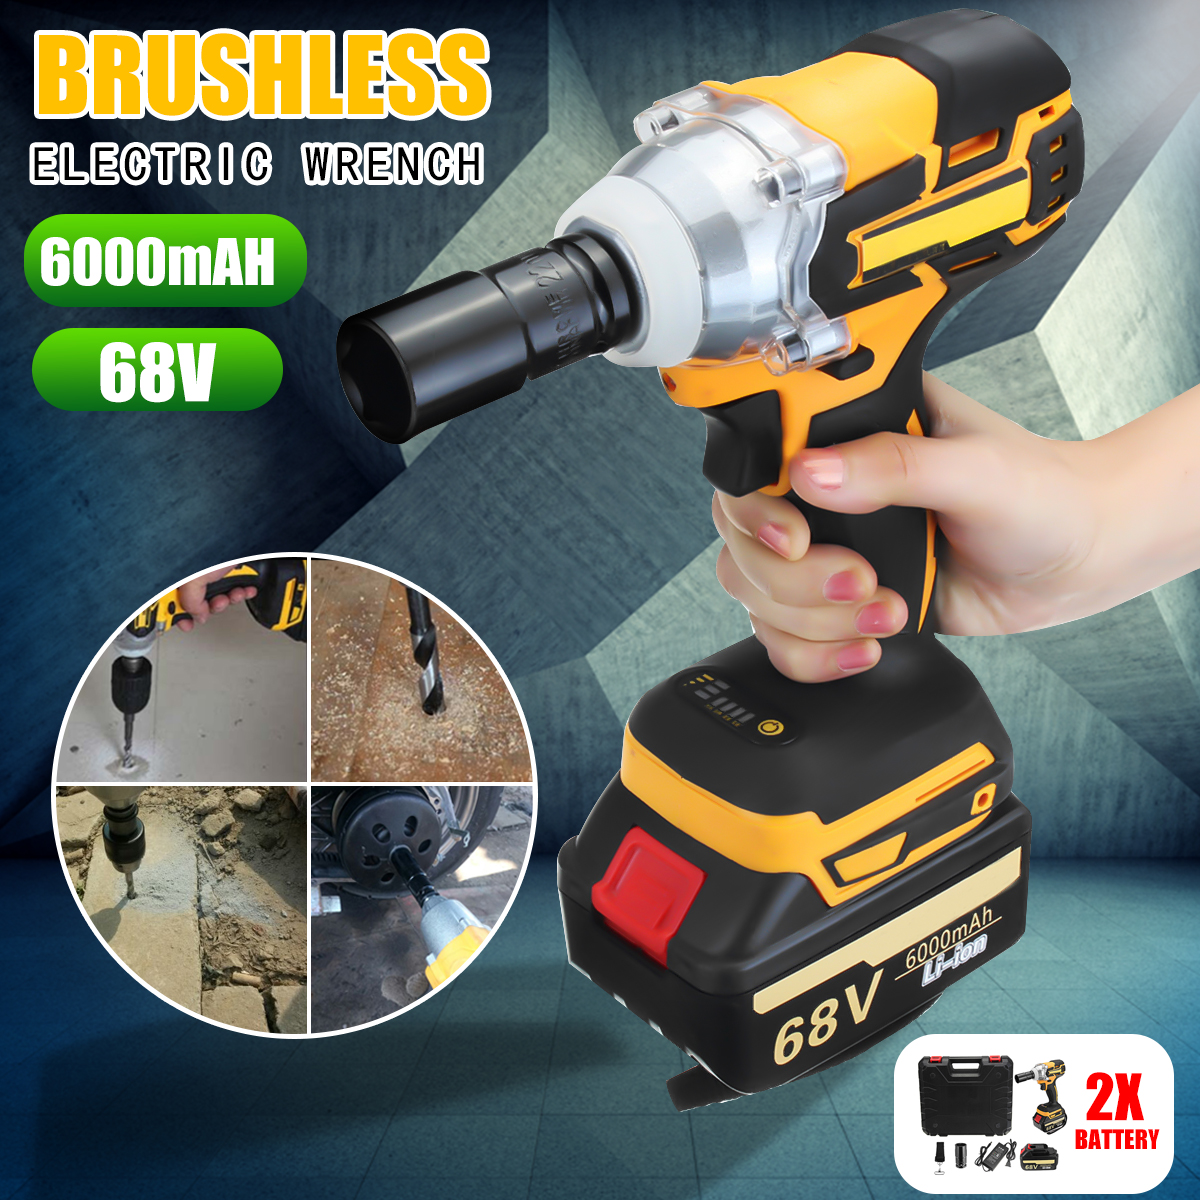 68V-6000mAh-Electric-Wrench-2-Batteries-1-Charger-Brushless-Cordless-Drive-Impact-Wrench-Tools-1282965-1